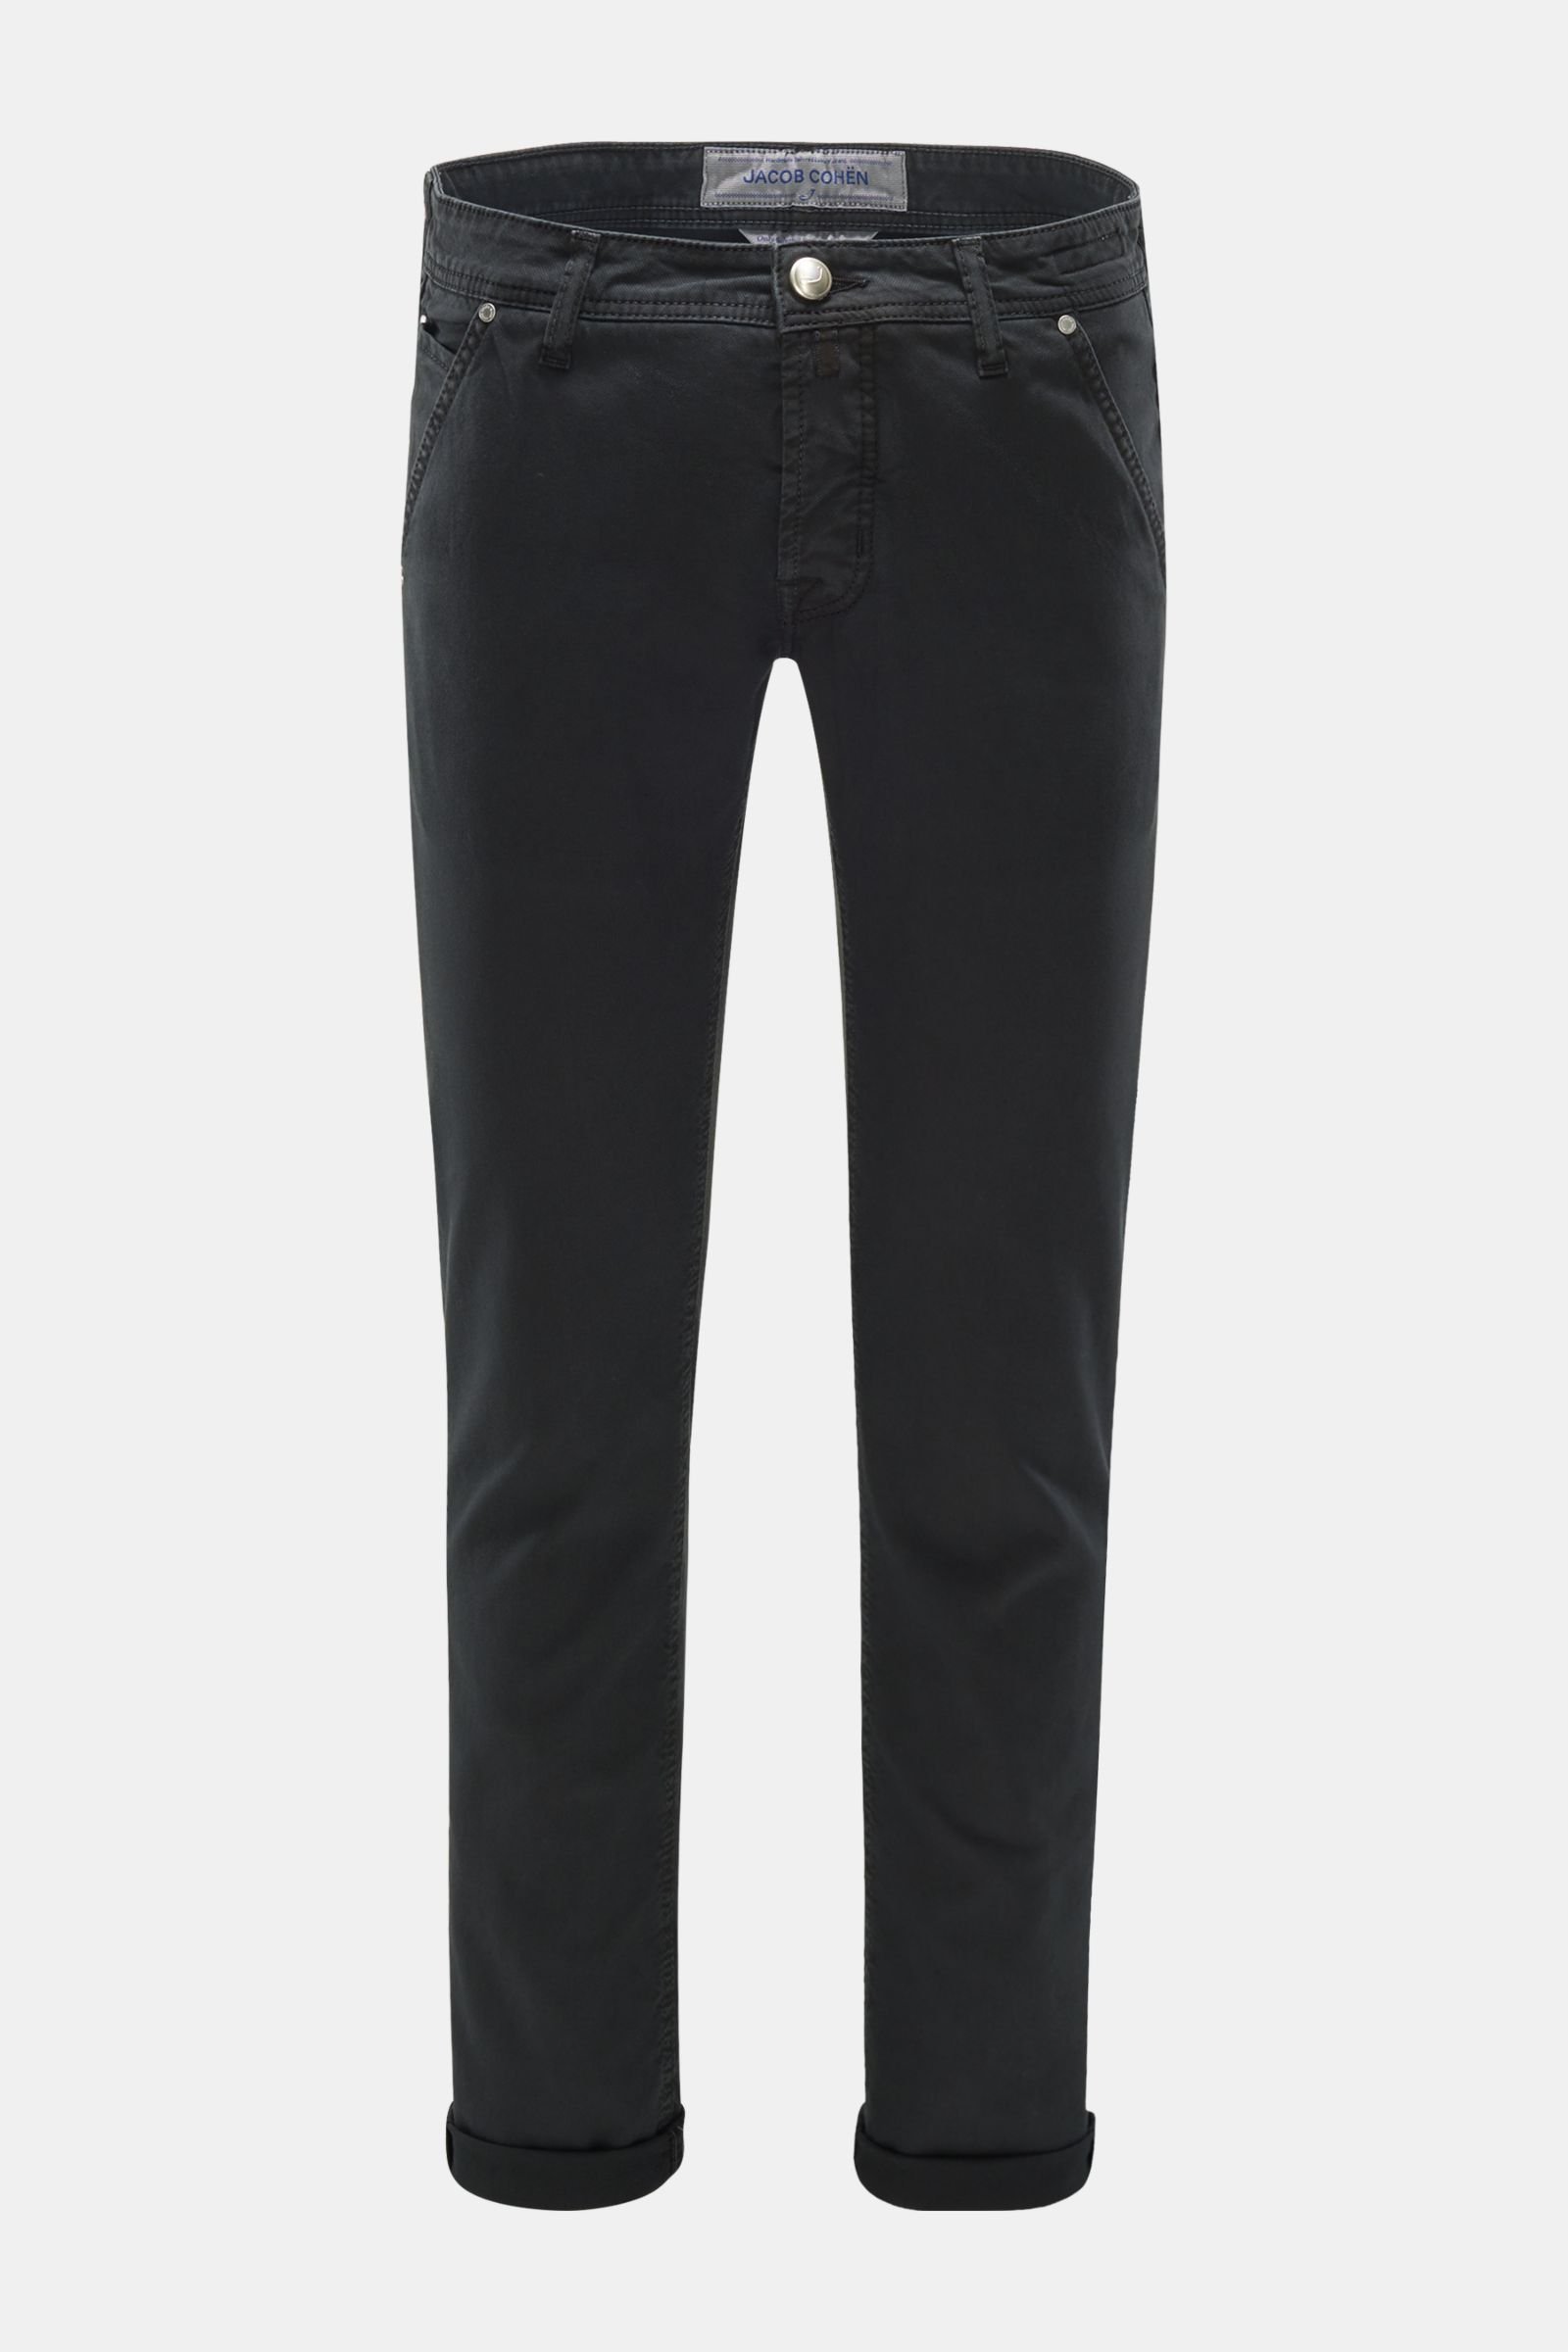 Cotton trousers 'J613 Comfort Slim Fit' anthracite